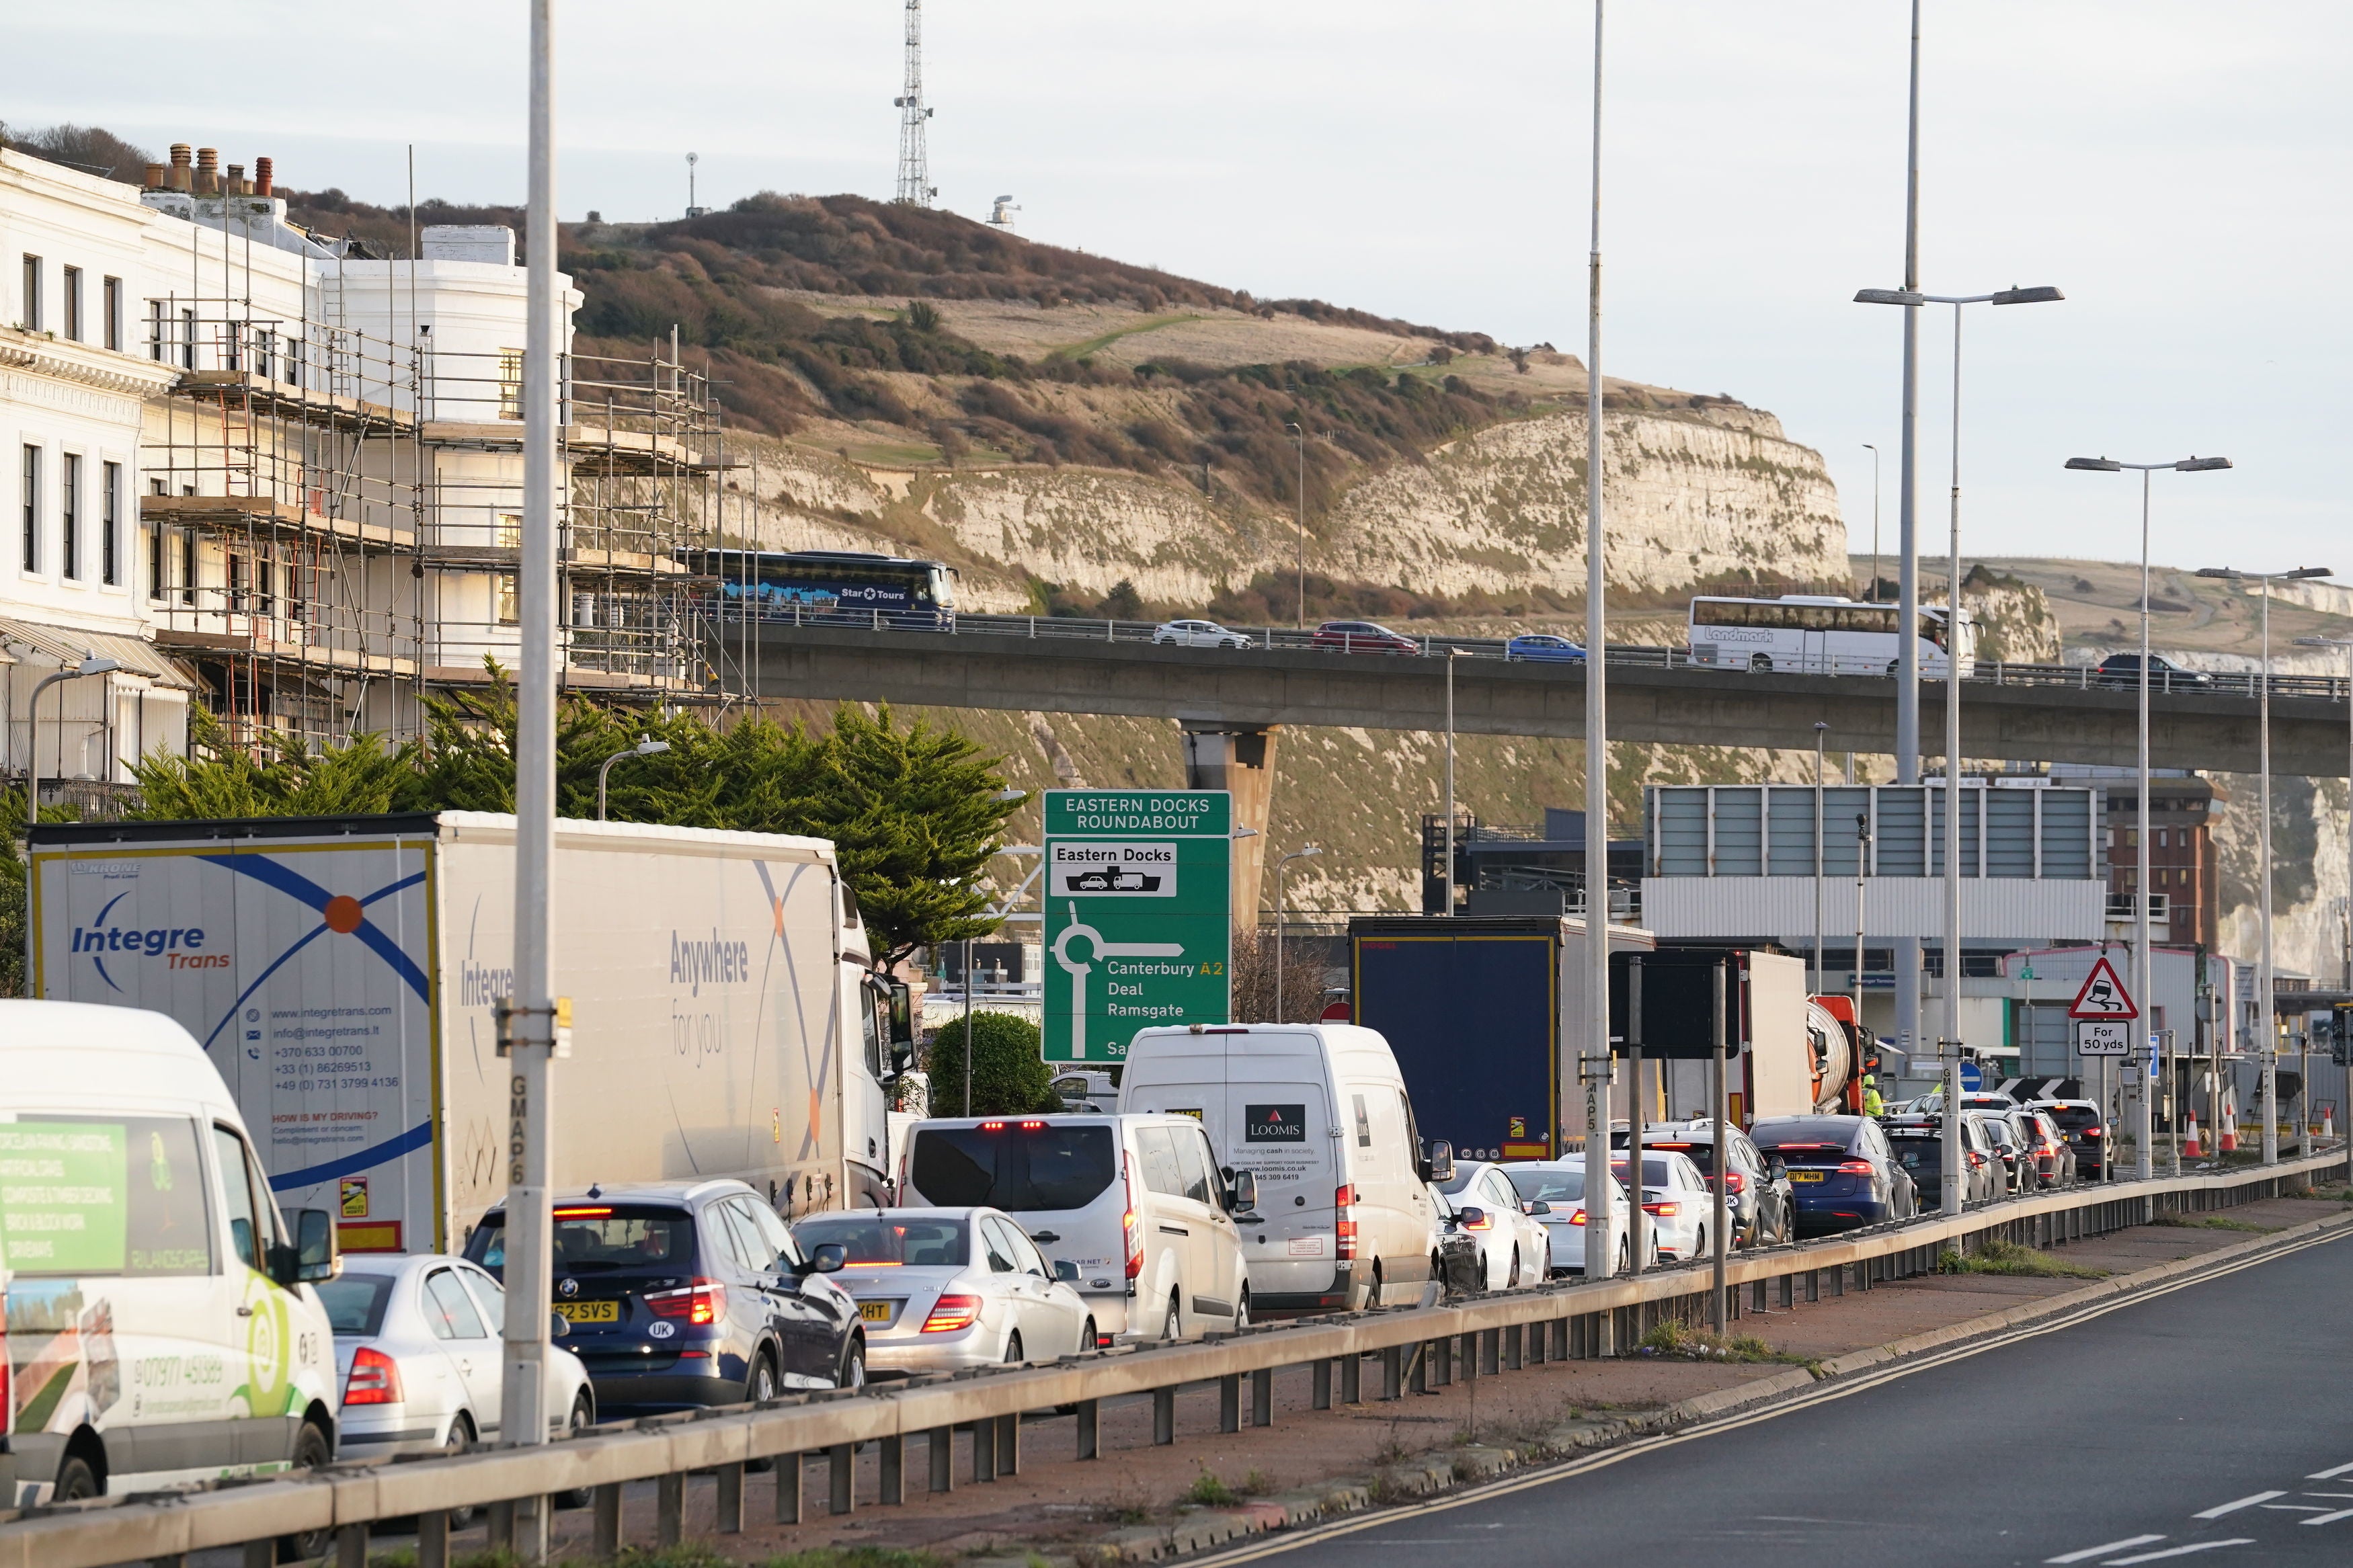 pTraffic queues for ferries at the Port of Dover in Kent as people travel to their destinations for the Christmas holidays/p